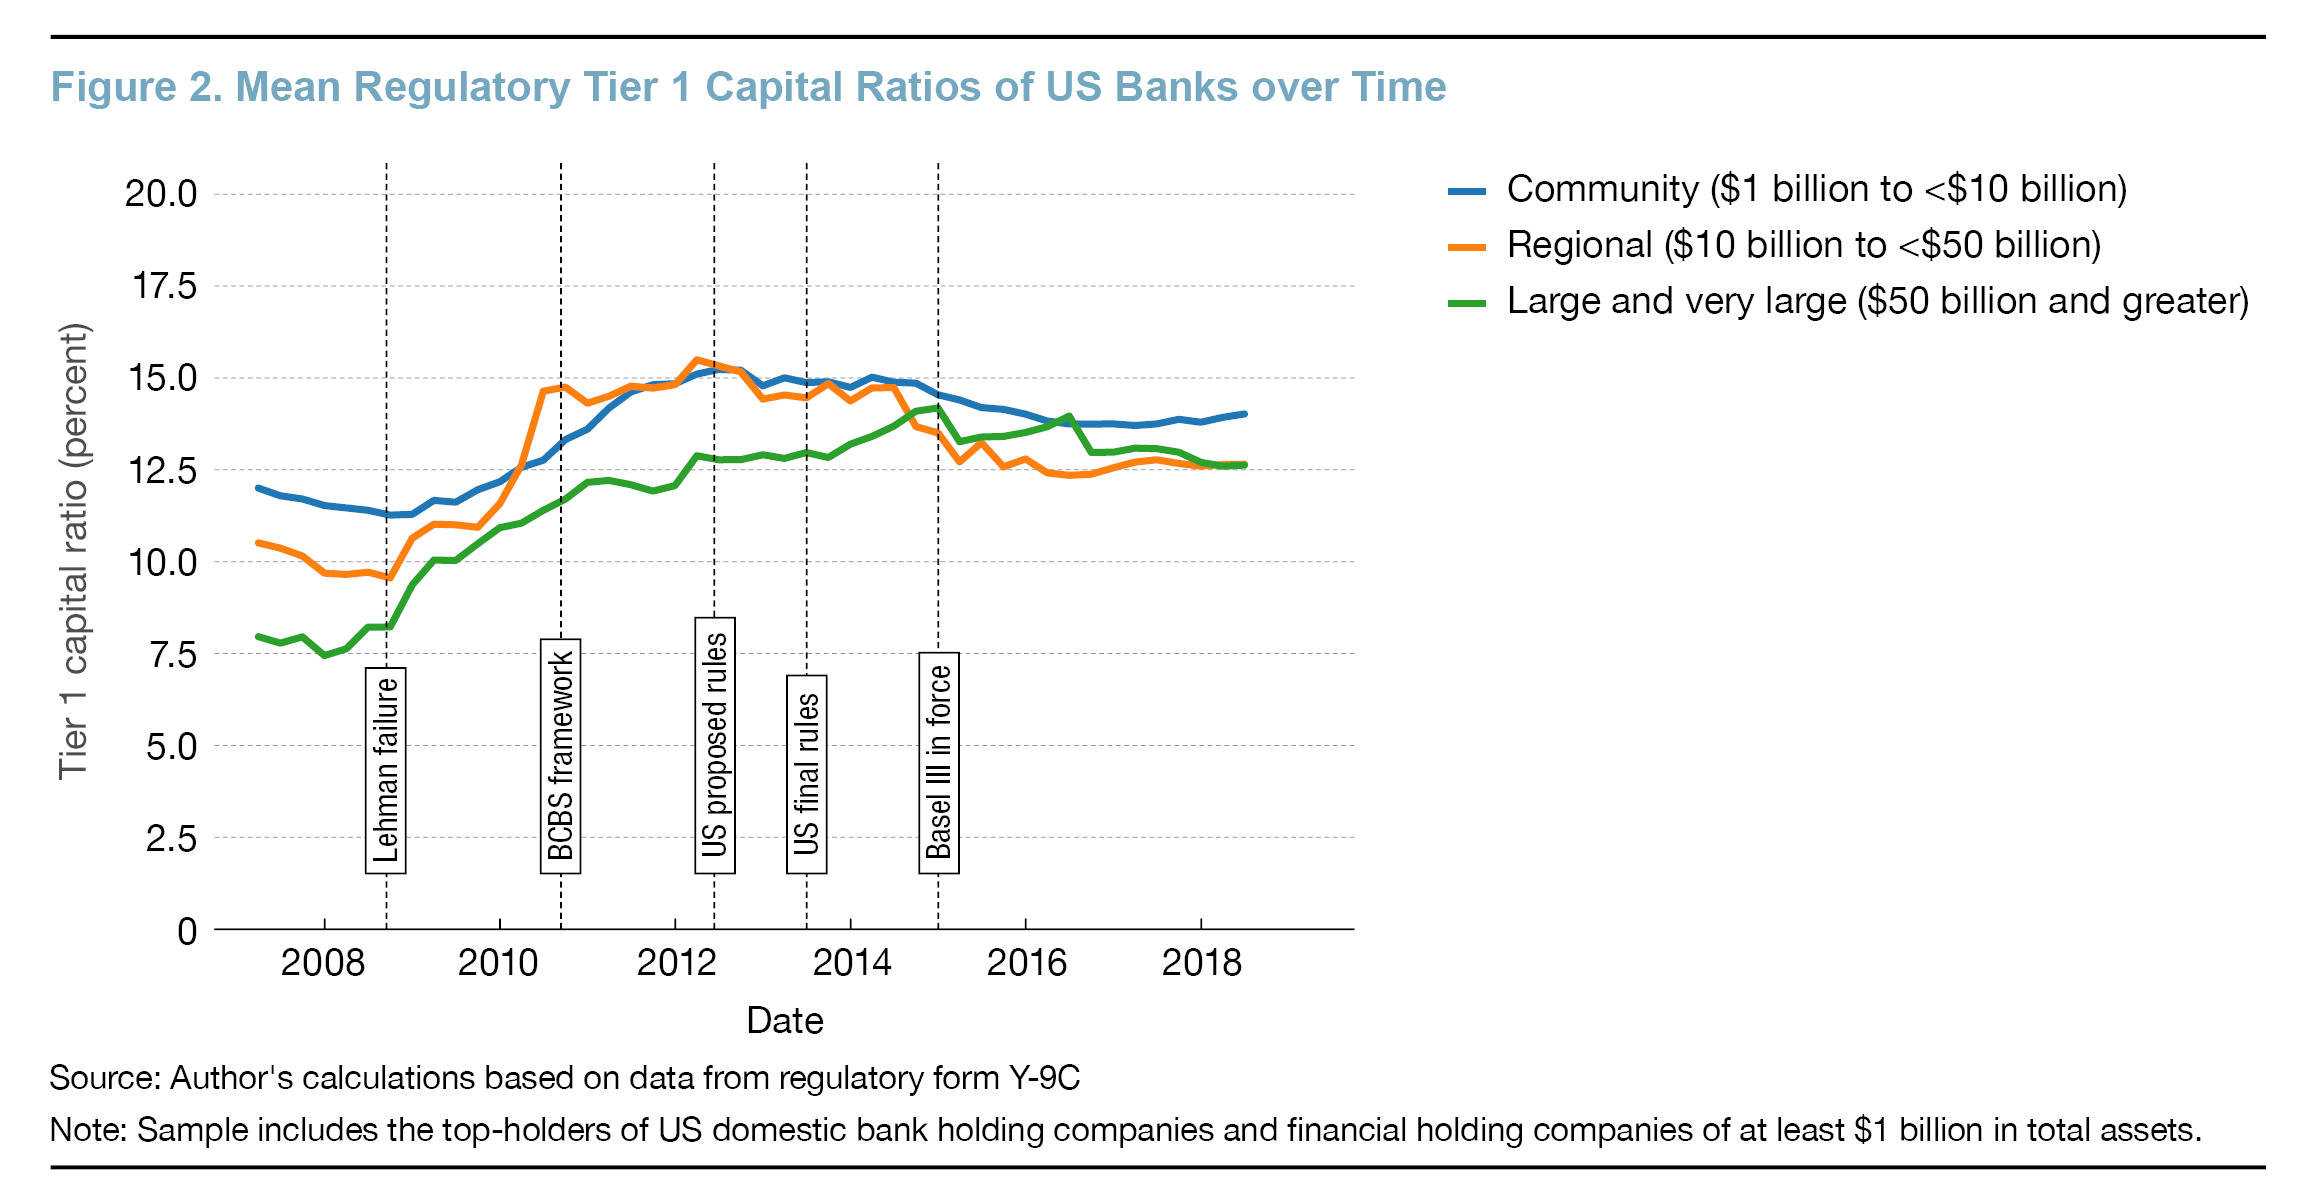 Figure 2. Mean Regulatory Tier 1 Capital Ratios of US Banks over Time